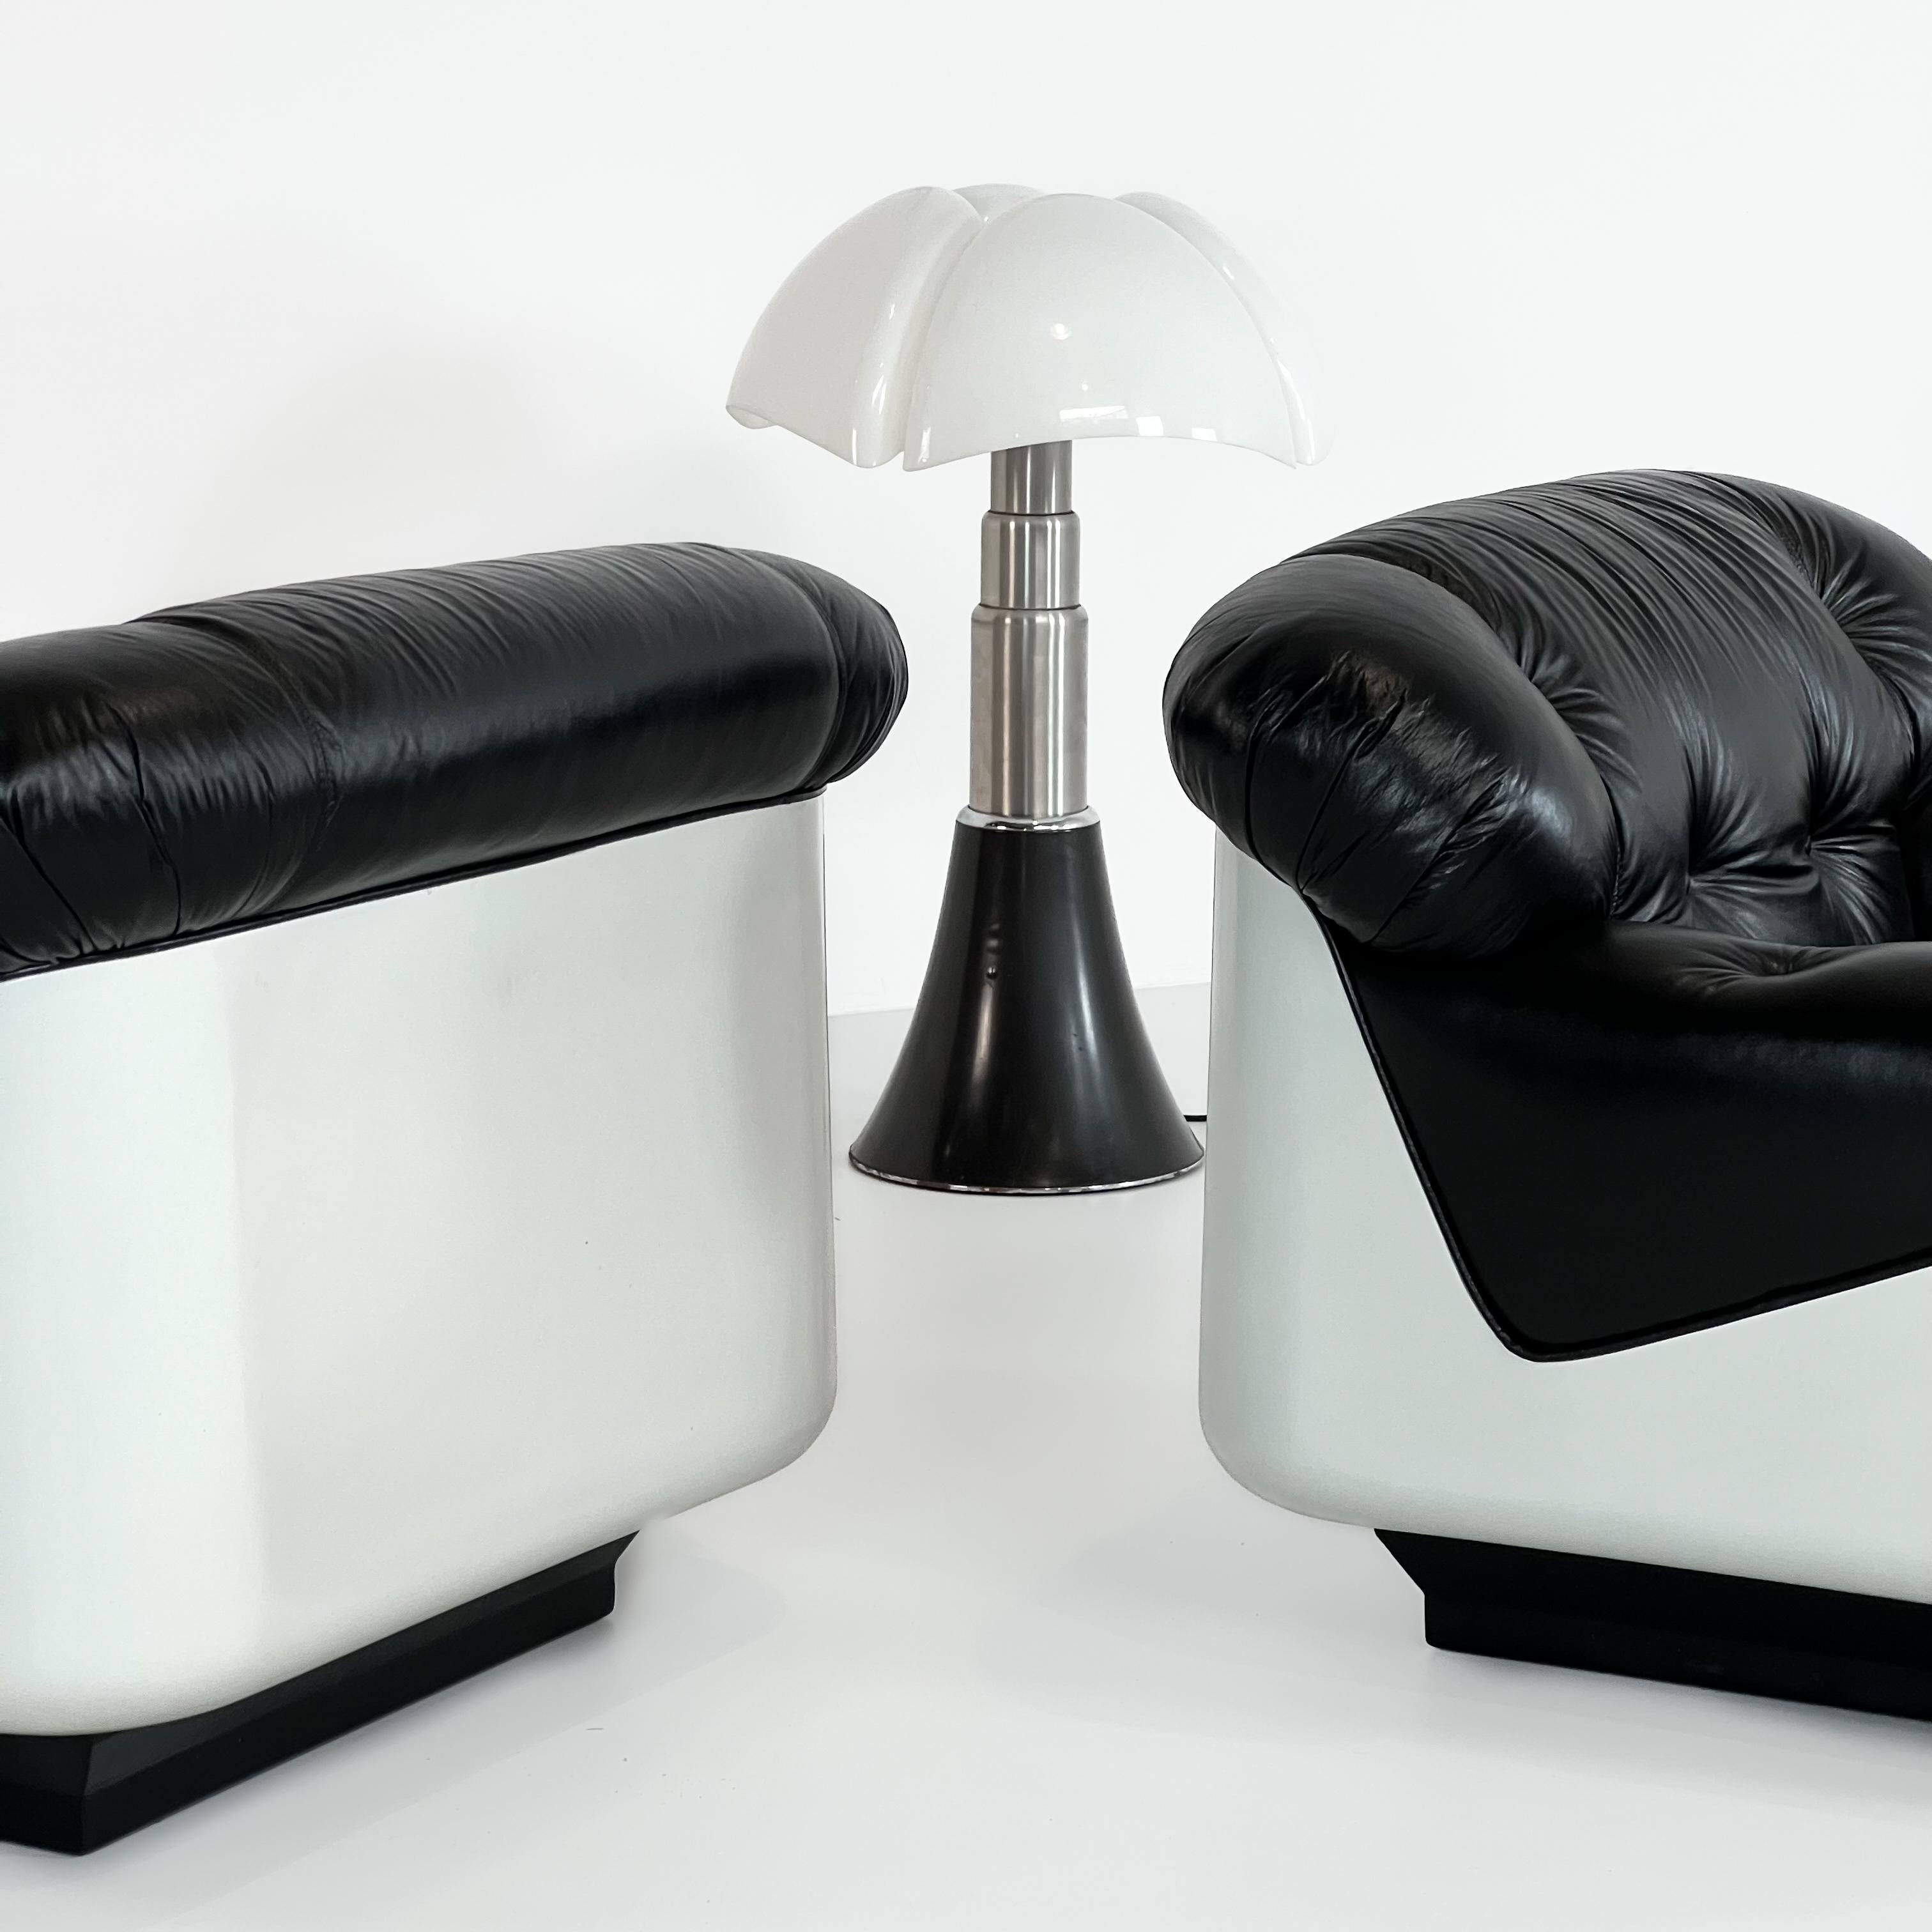 Mid-20th Century Rare Pair of Armchairs Fiberglass and Natural Leather by Jorge Zalszupin 60's For Sale